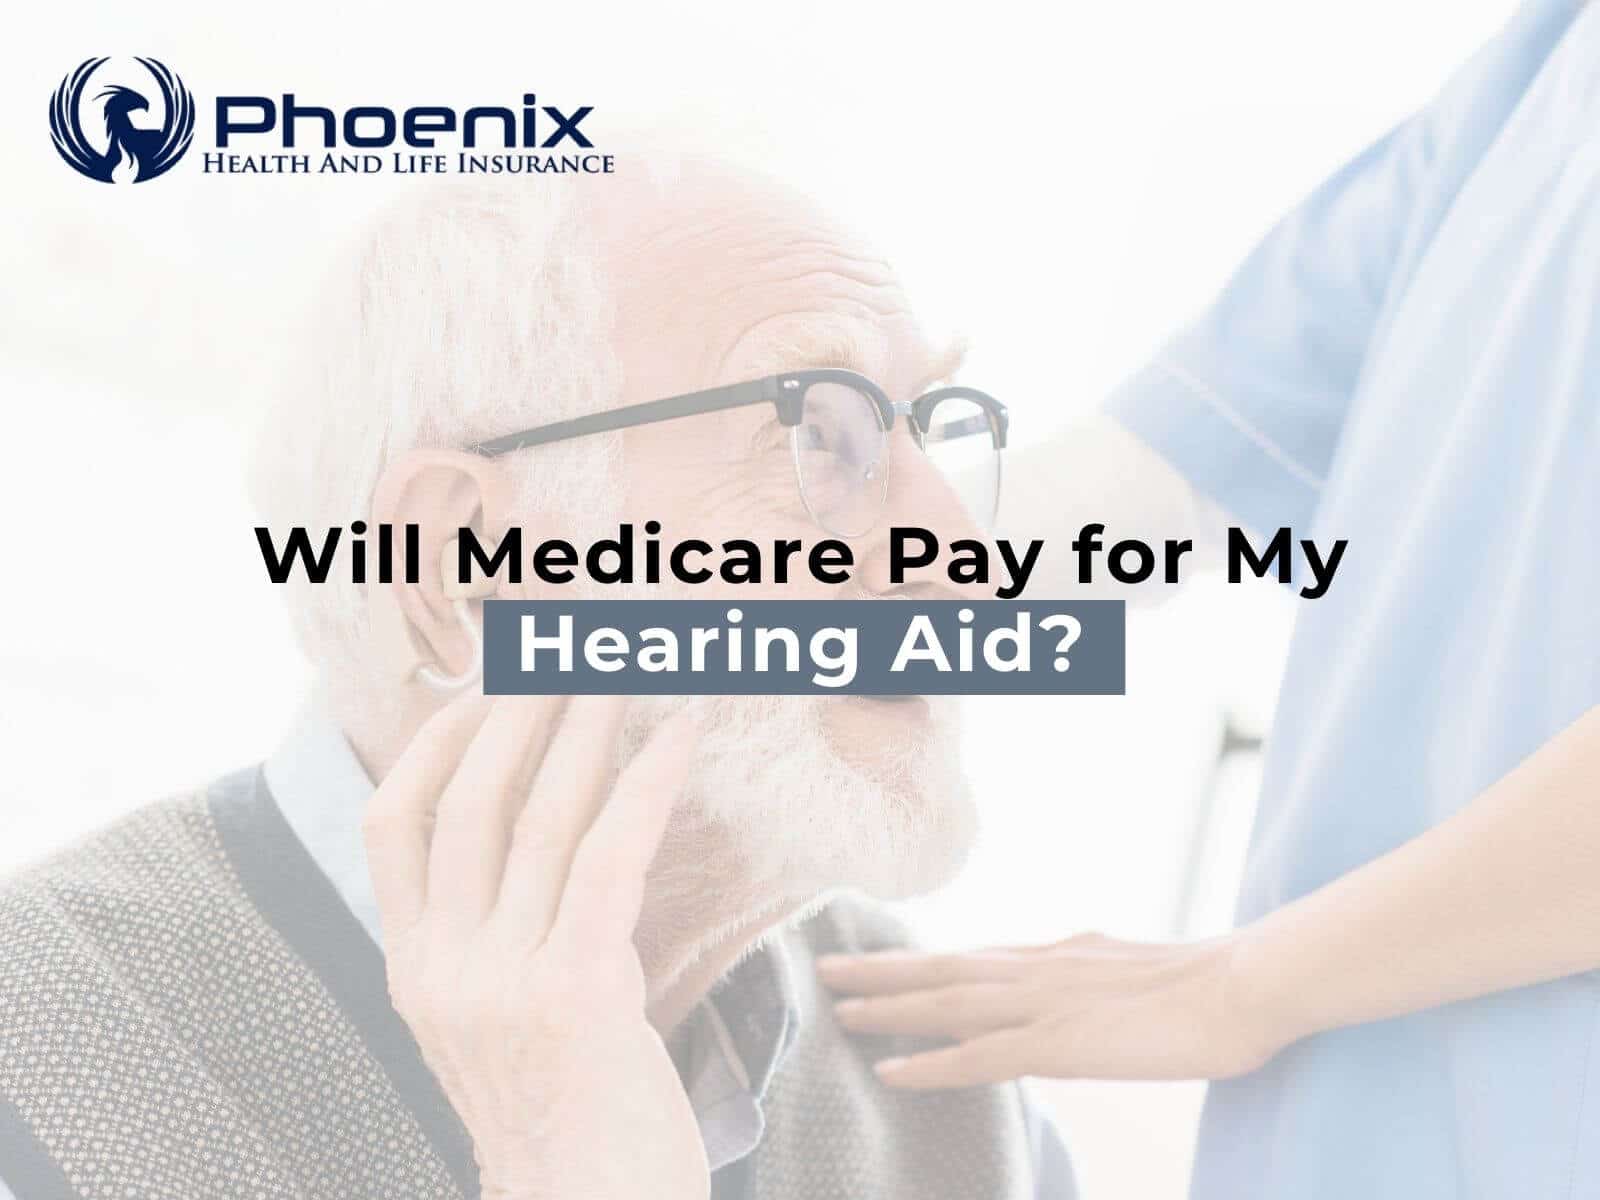 Will Medicare Pay for My Hearing Aid?